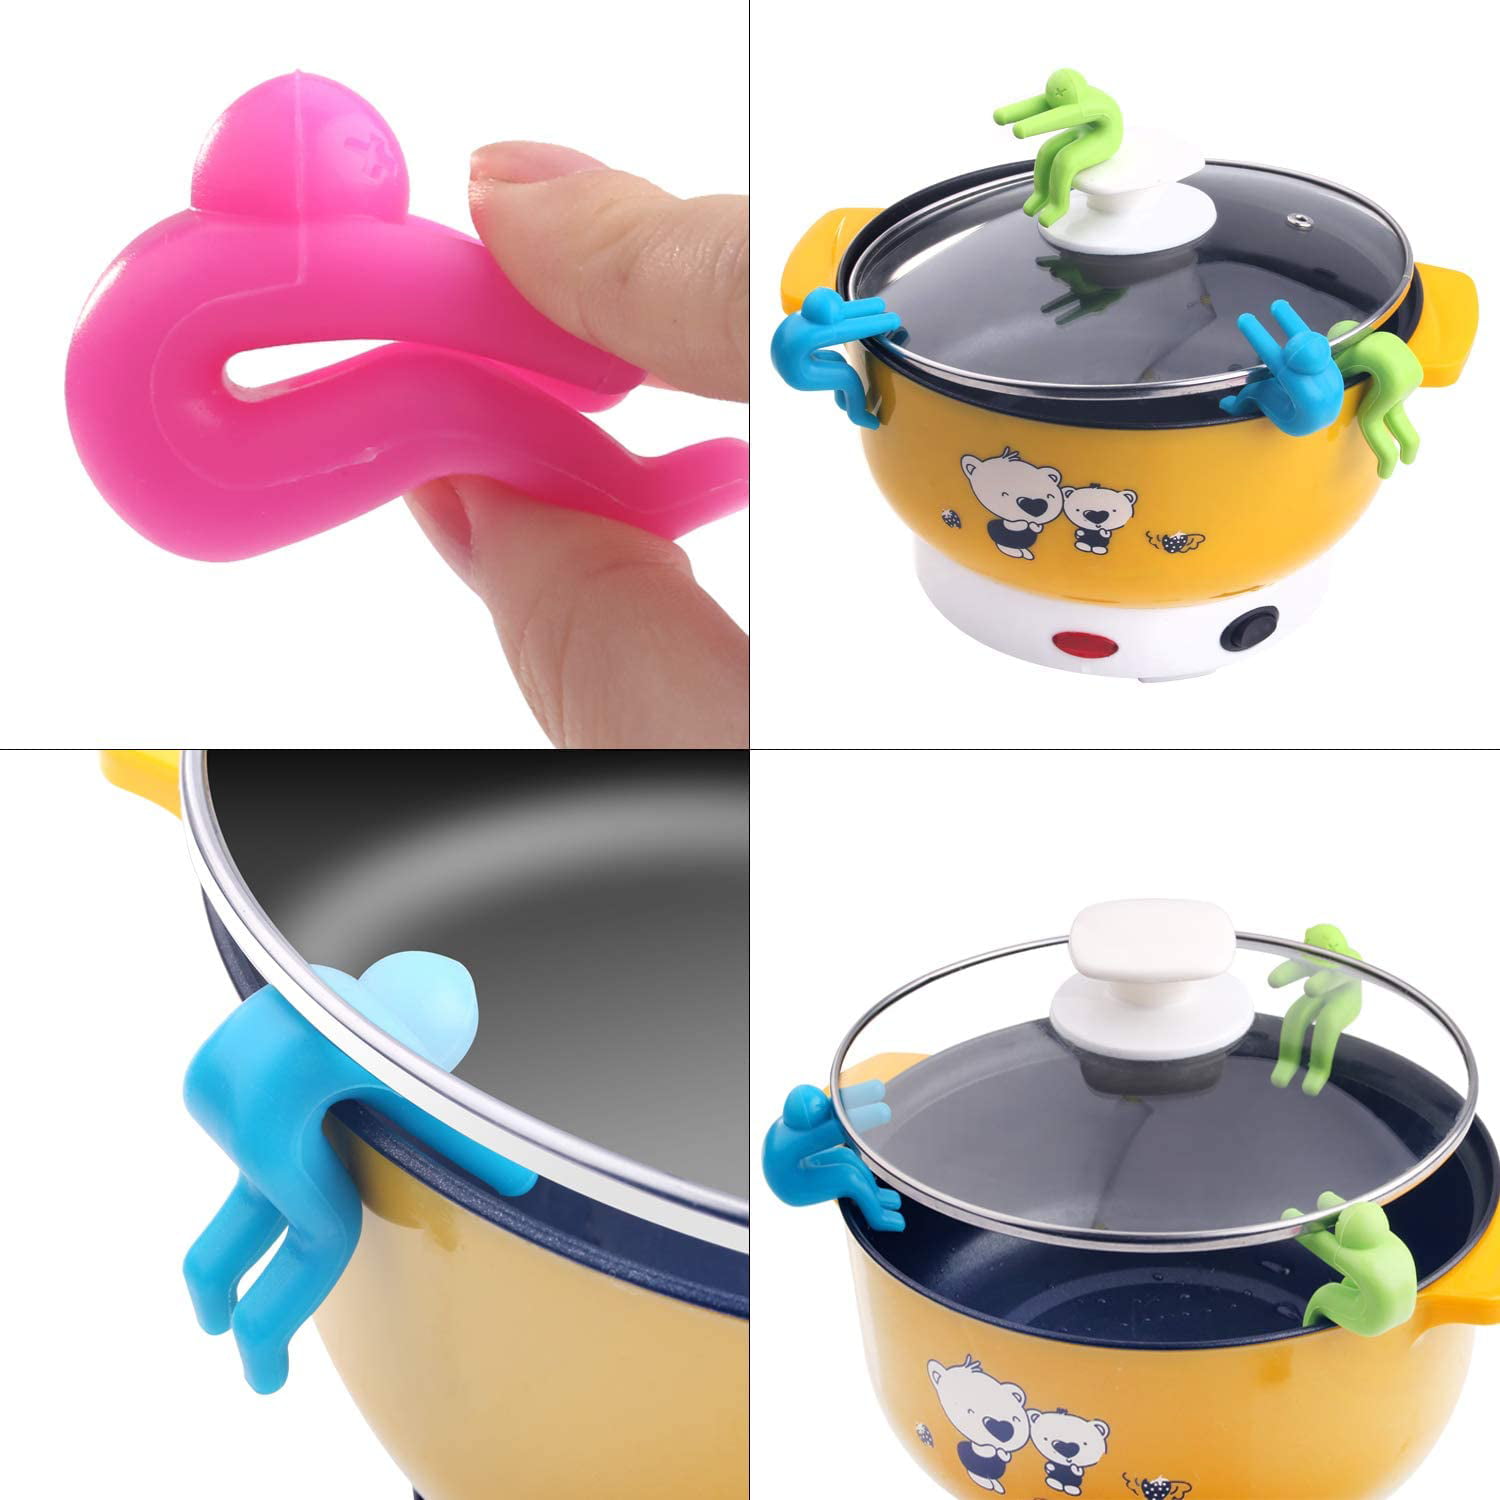 DOITOOL 6pcs Silicone Lid Lifters Spill-Proof Silicone Lid Lifters for Soup Pot Lid Lifter for Pots and Pans Lid Stand Heat Resistant Holder Pot Lid Lifts Creative Animal Shape Kitchen Tools 